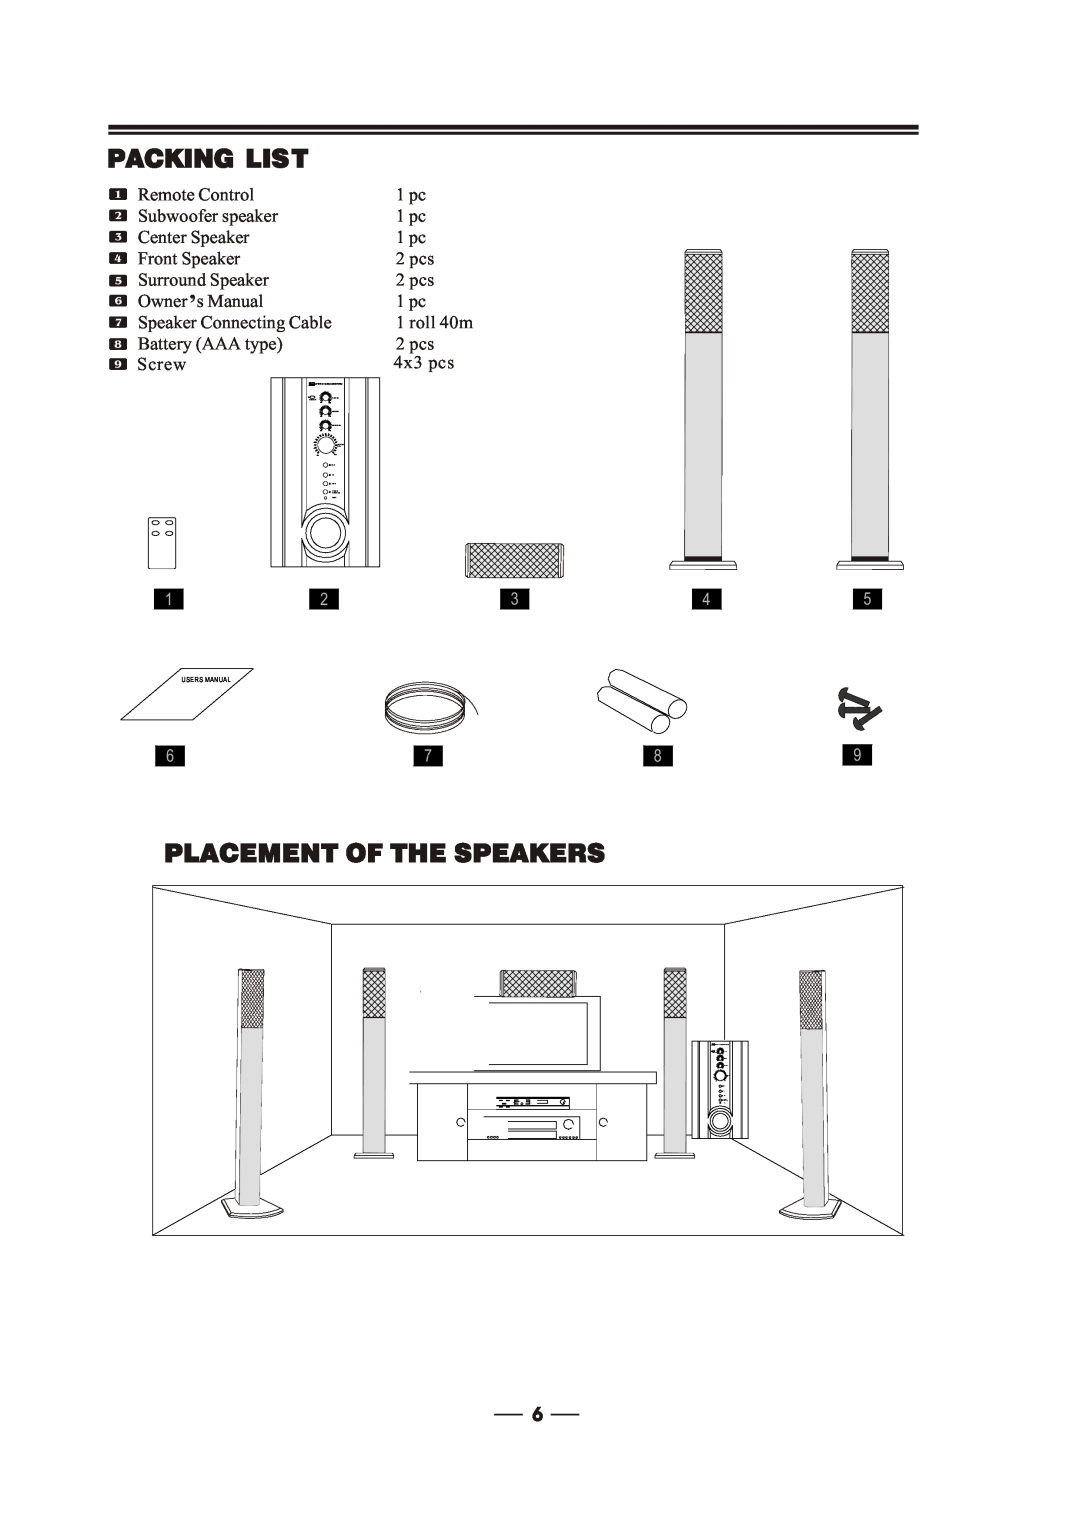 MidiLand 747H manual Packing List, Placement Of The Speakers 